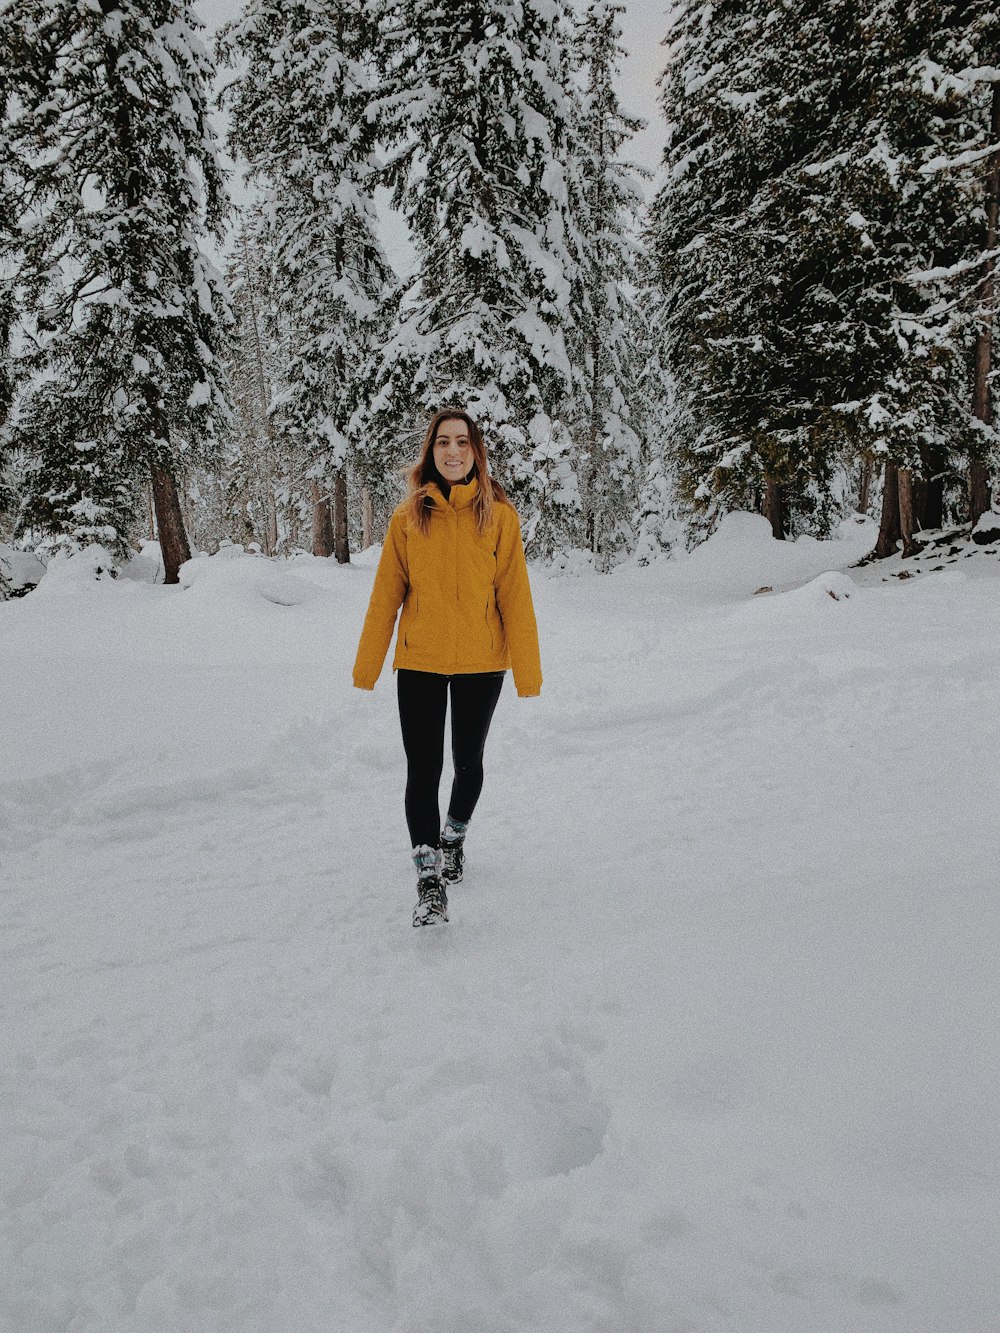 woman in yellow coat standing on snow covered ground